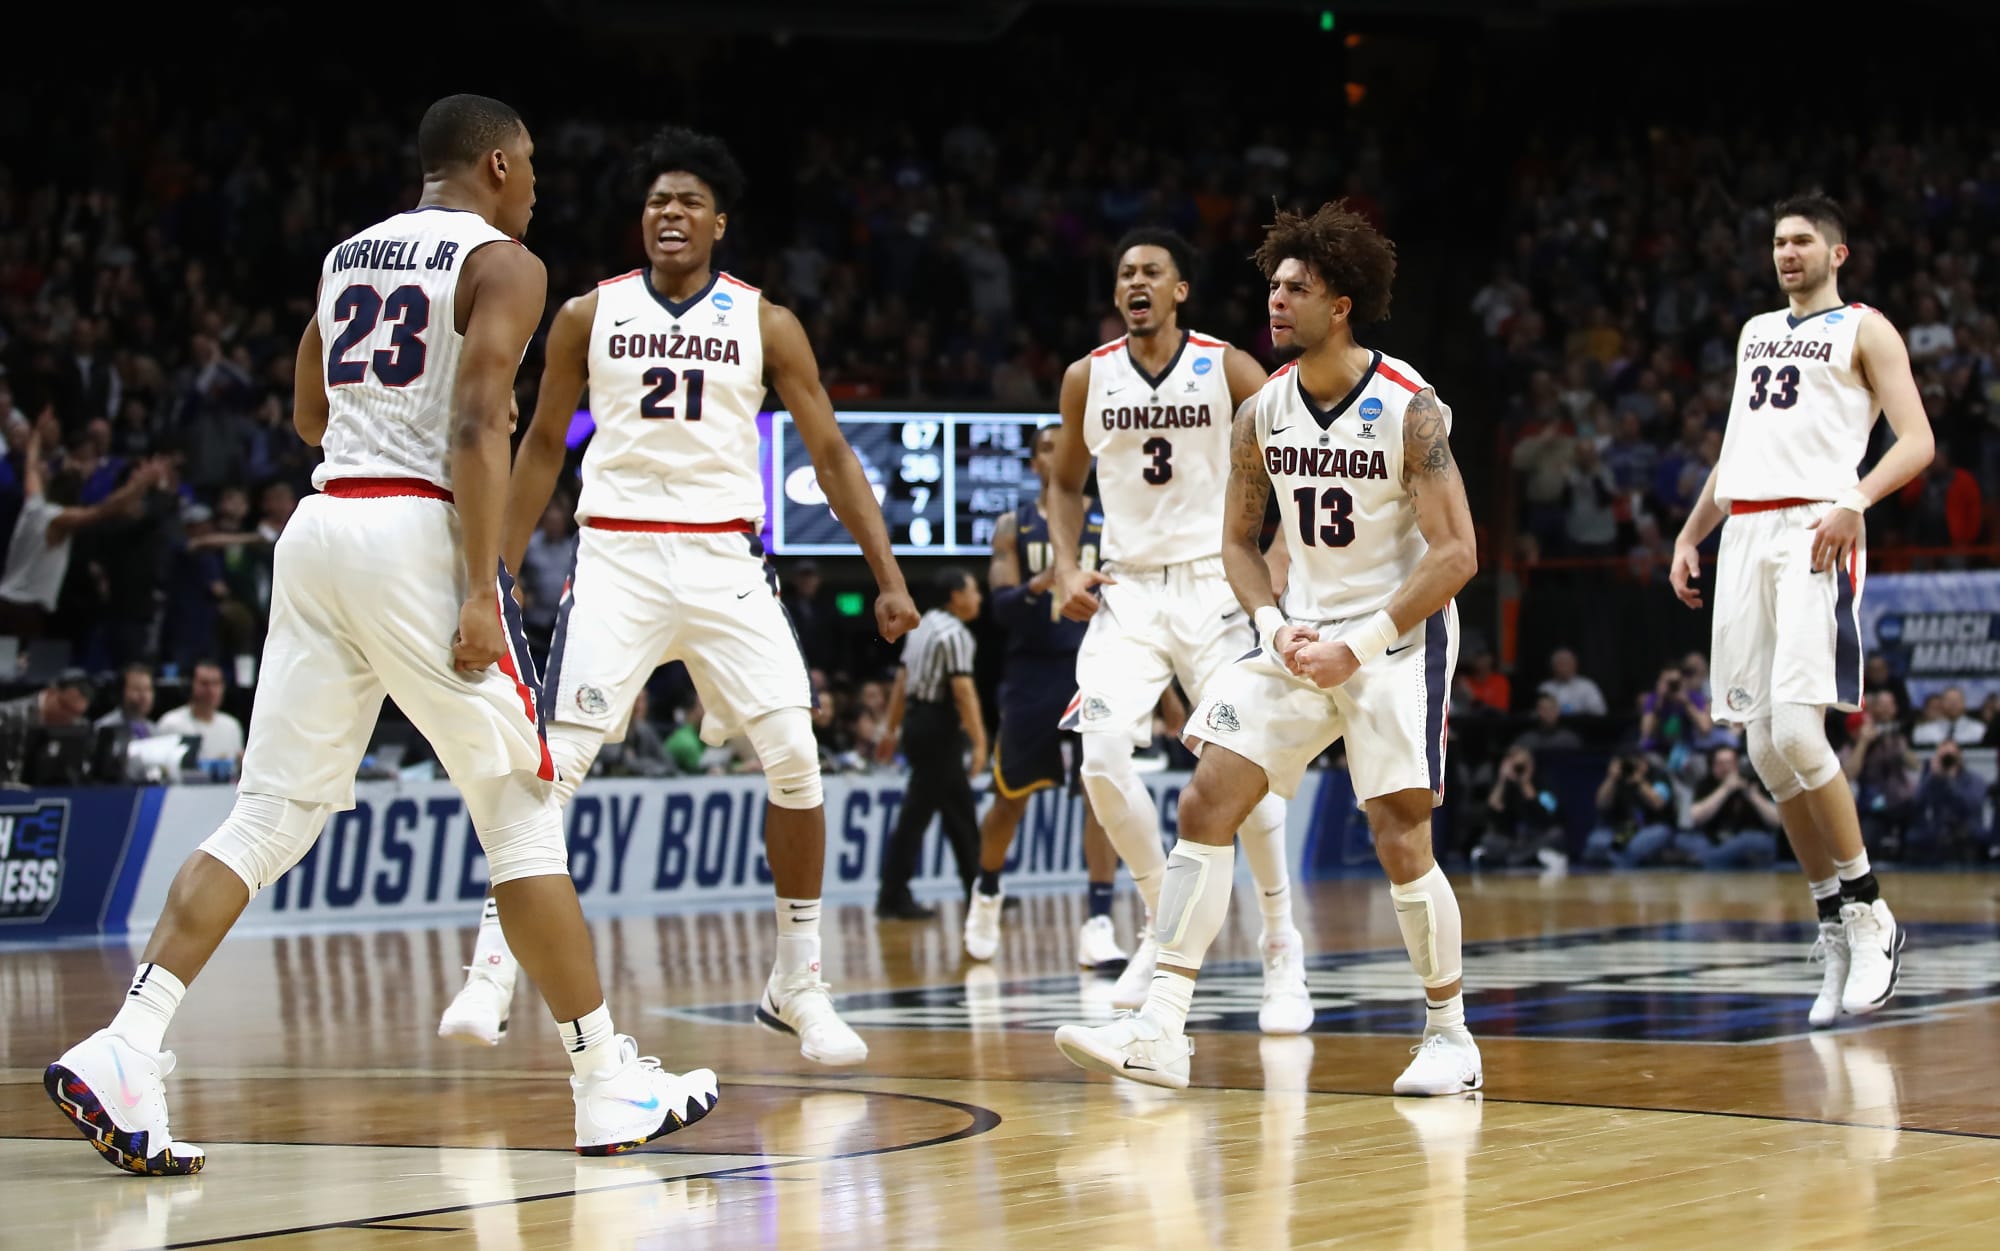 Gonzaga Basketball Zags survives UNC Greensboro to extend FirstRound